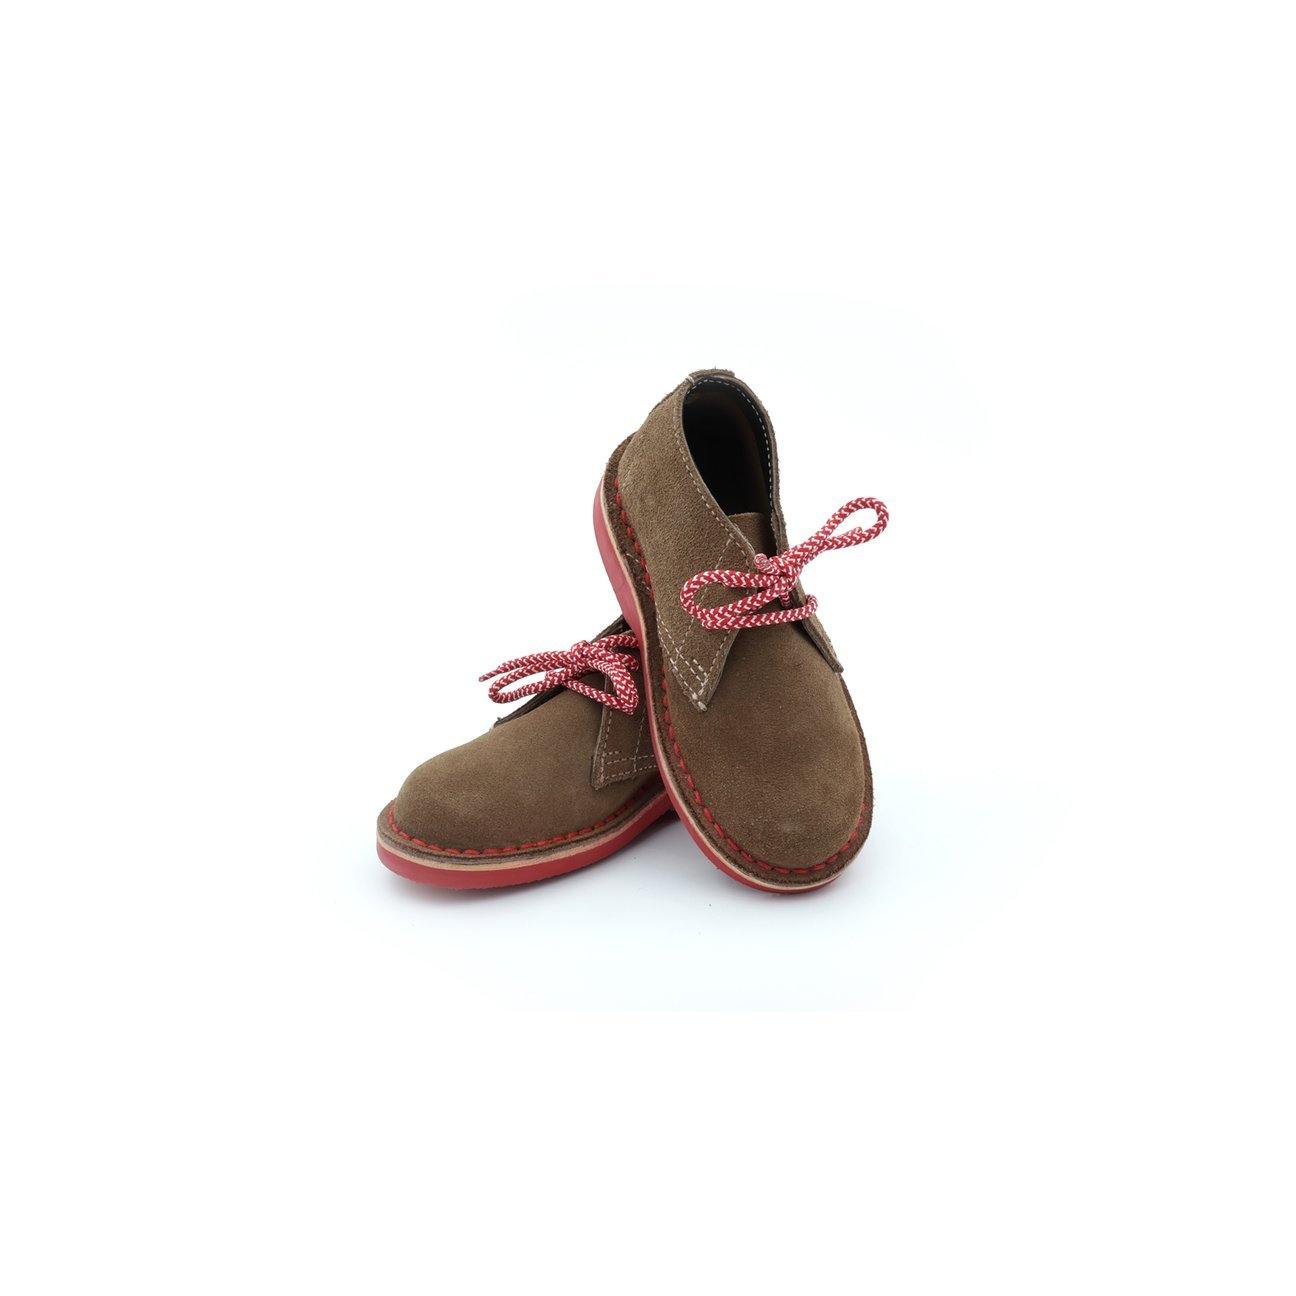 Lace Up Desert Boot - Red - stok.